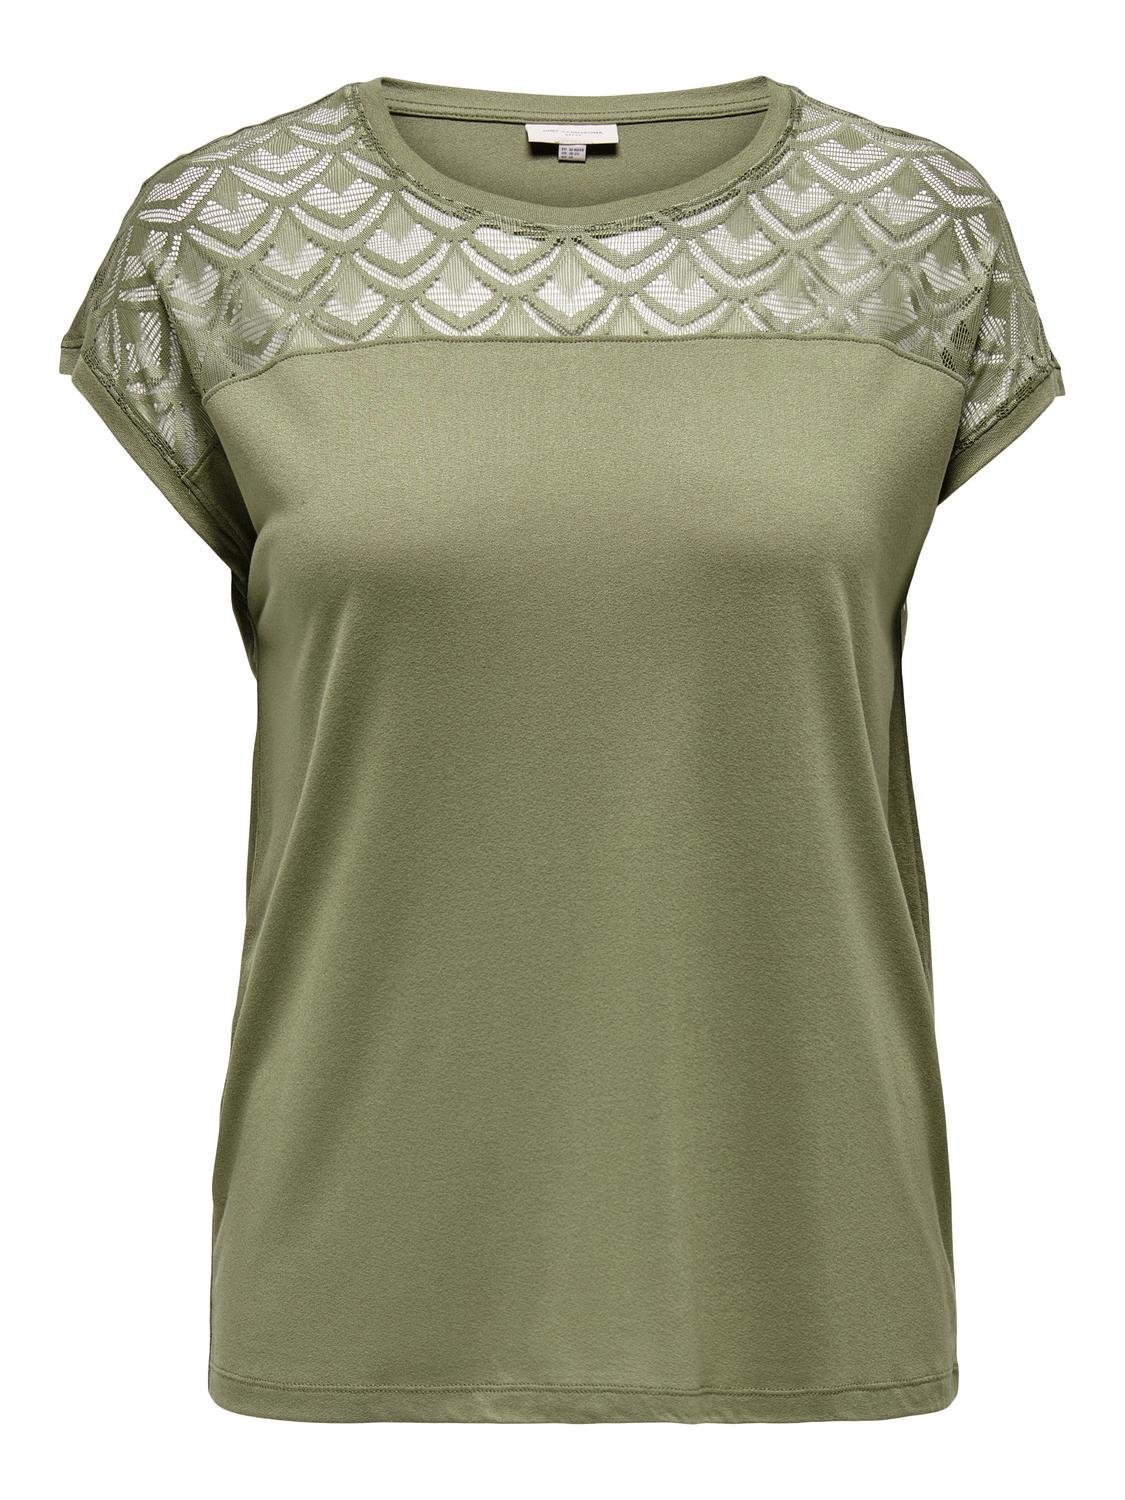 ONLY Curvy lace detail Top -Aloe - 15197908